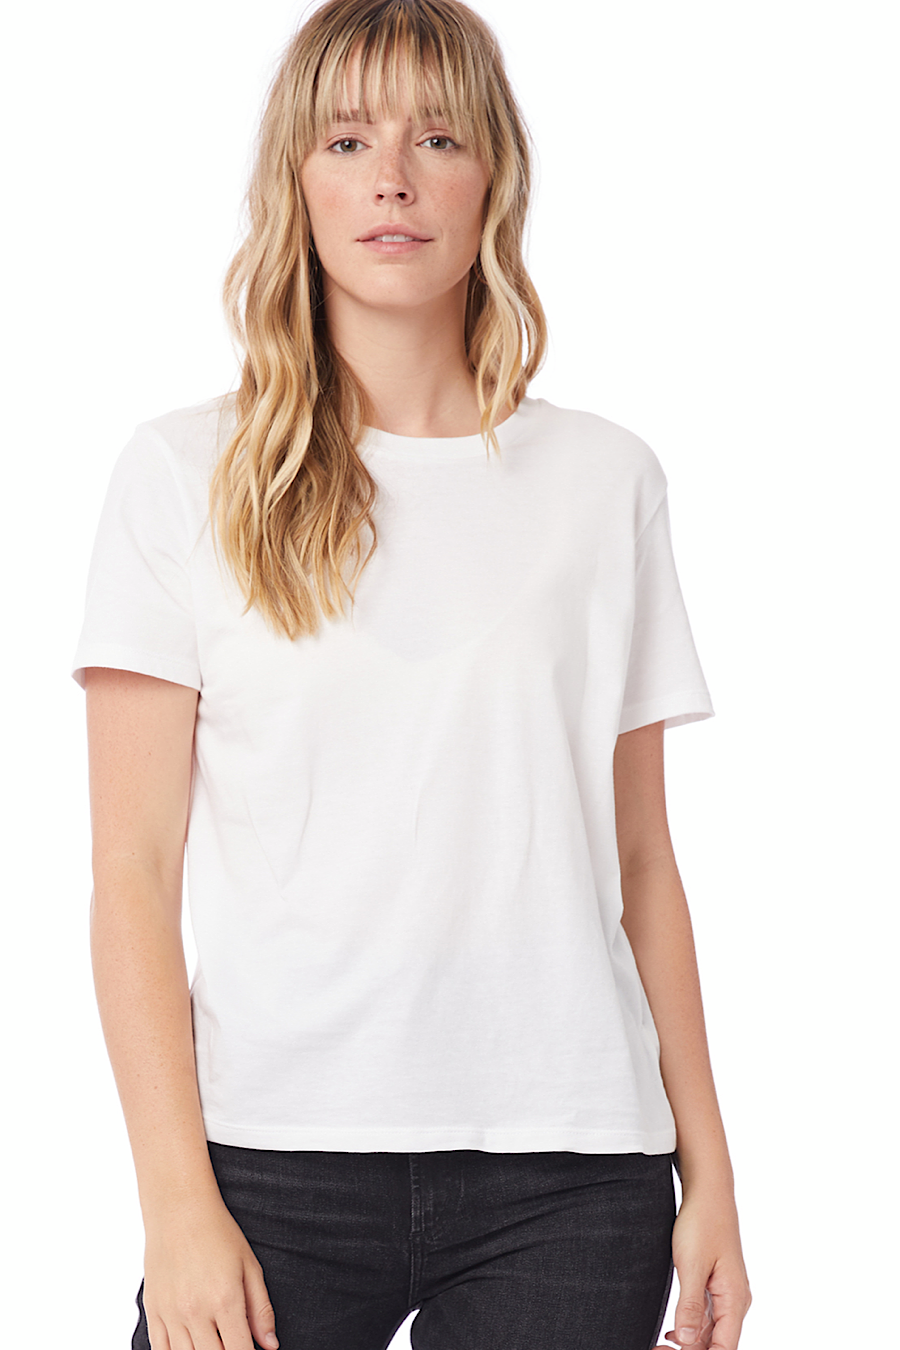 Her Go-To T-Shirt in White